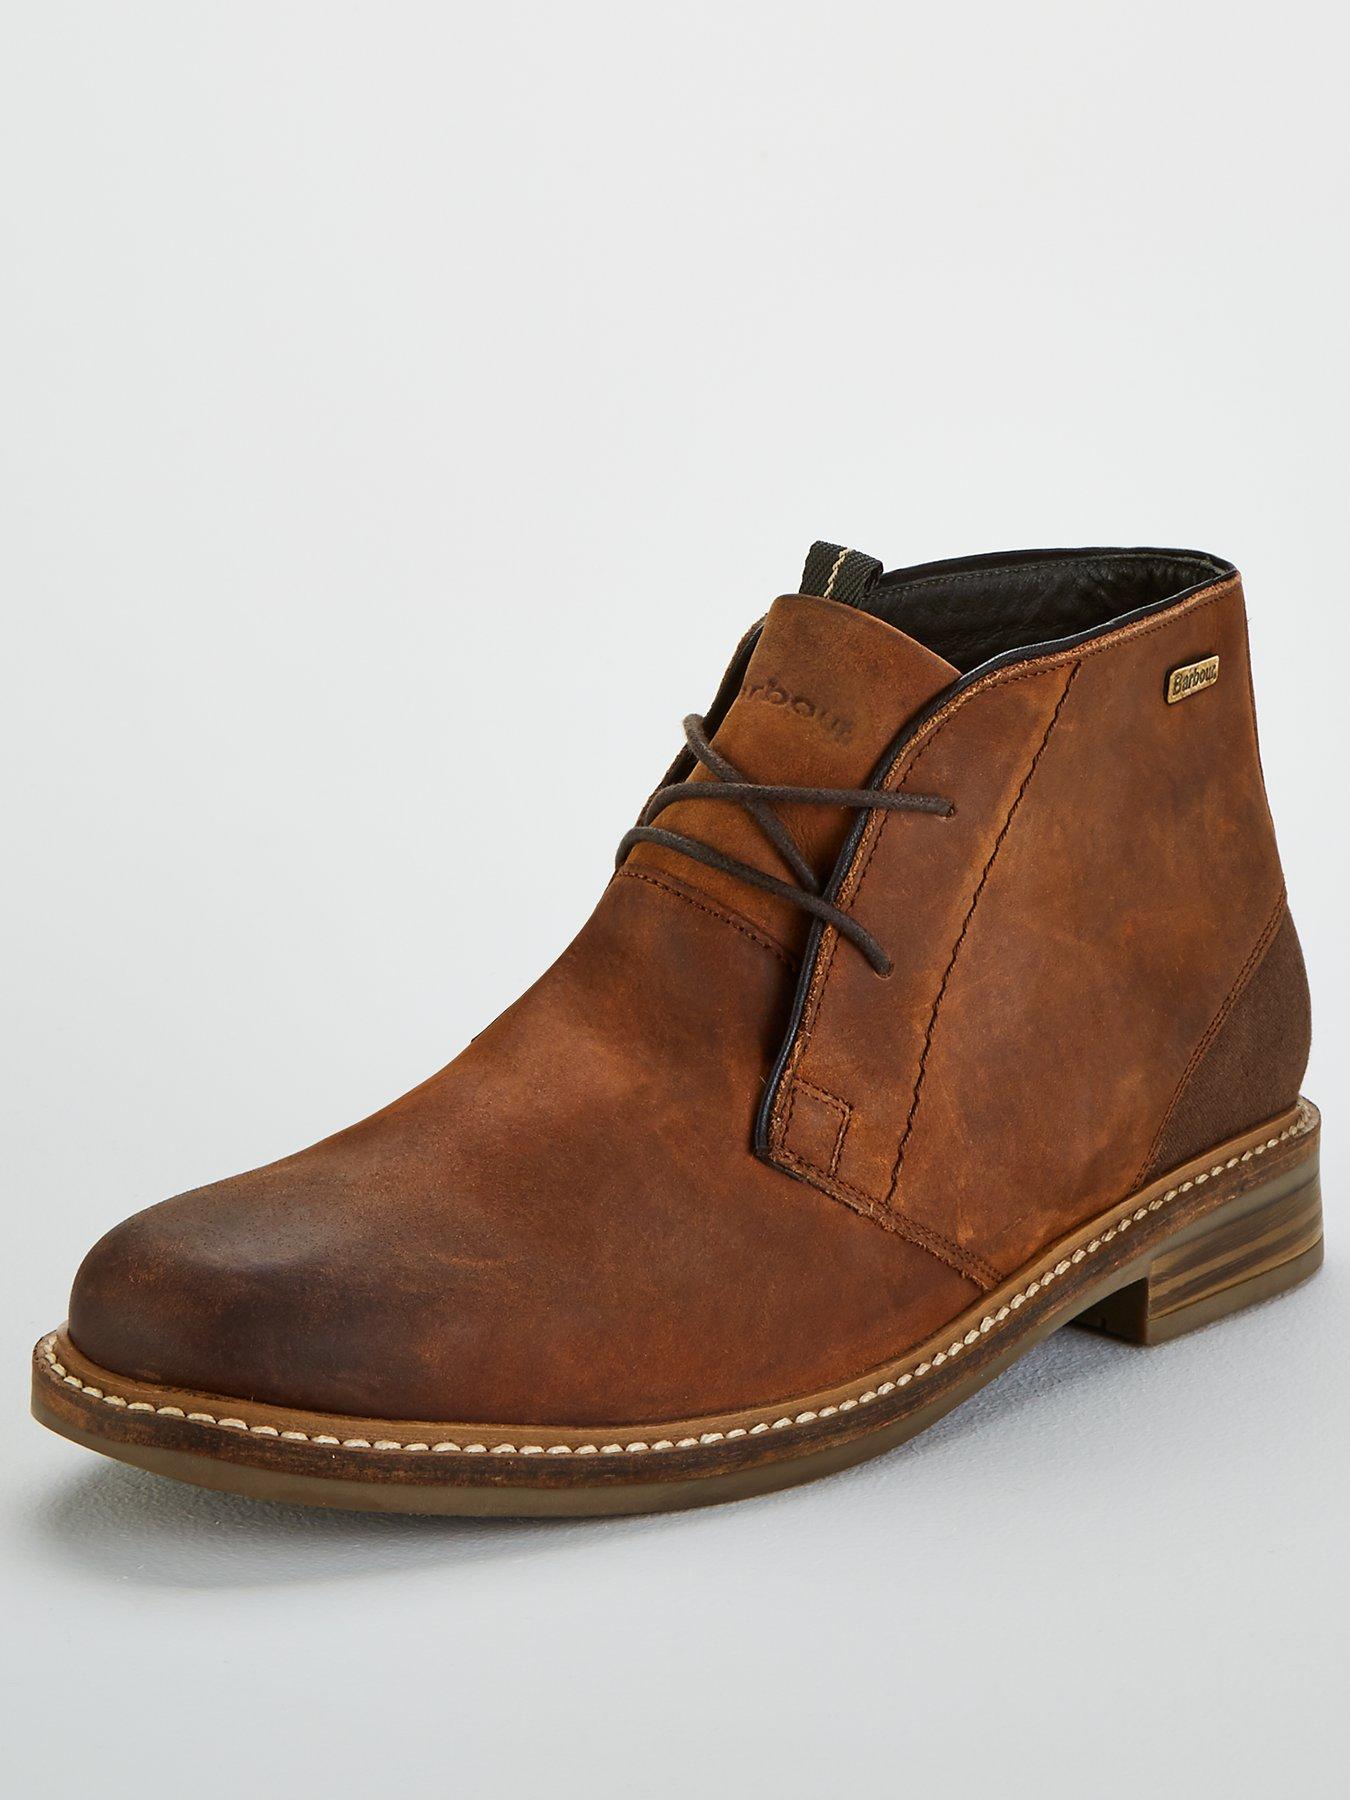 barbour readhead boots